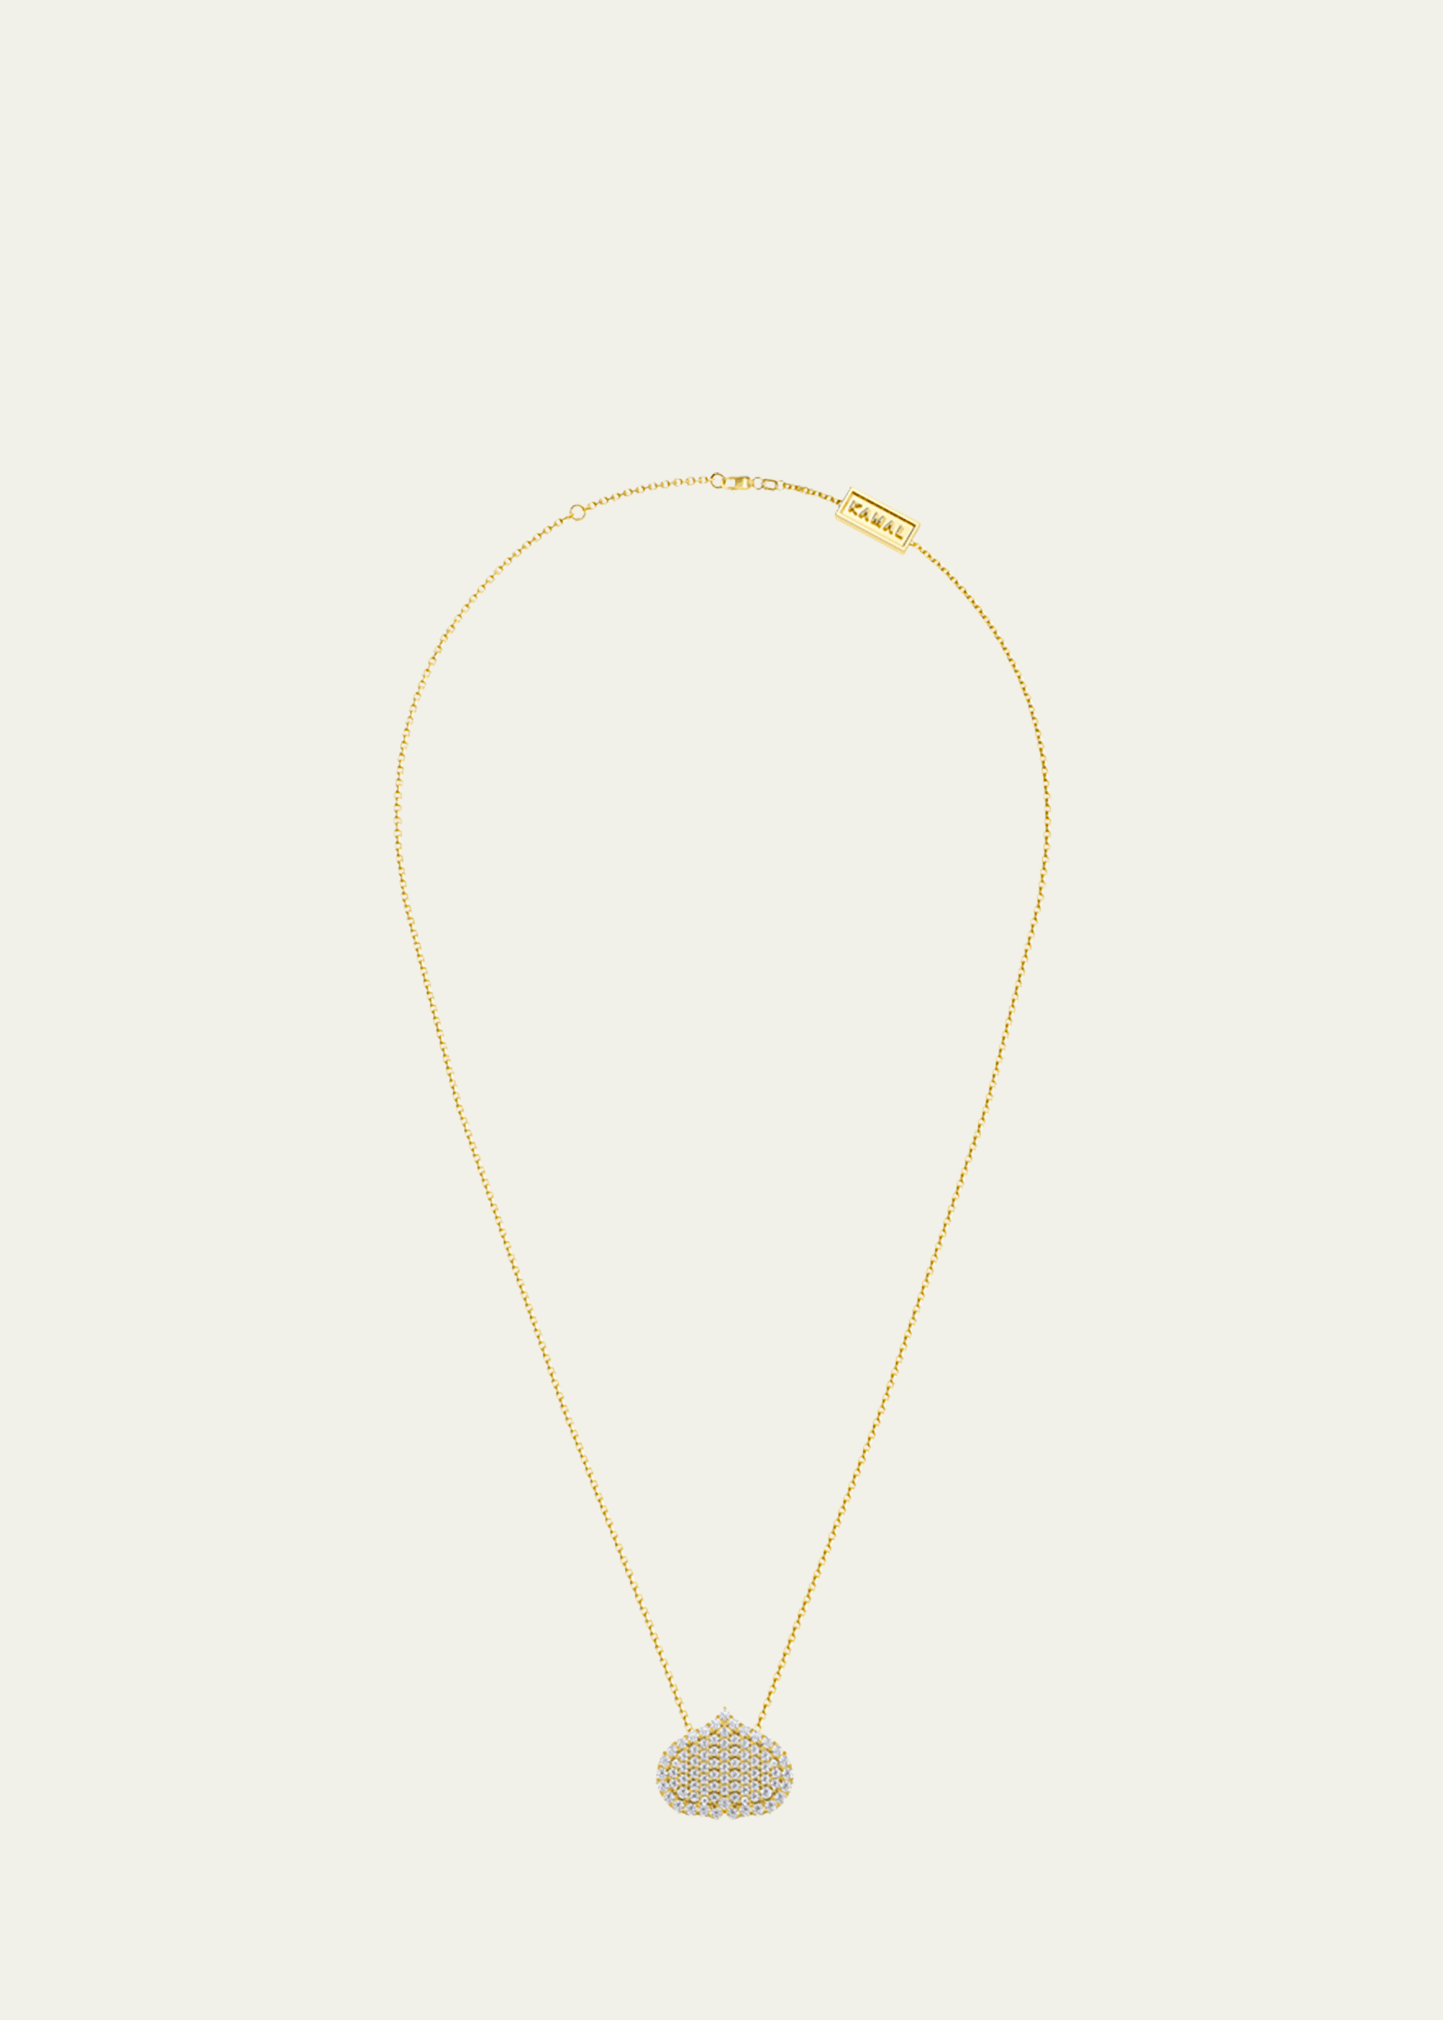 Kamal Eye Adore Diamond Pave Pendant Necklace, 15mm In Yellow Gold